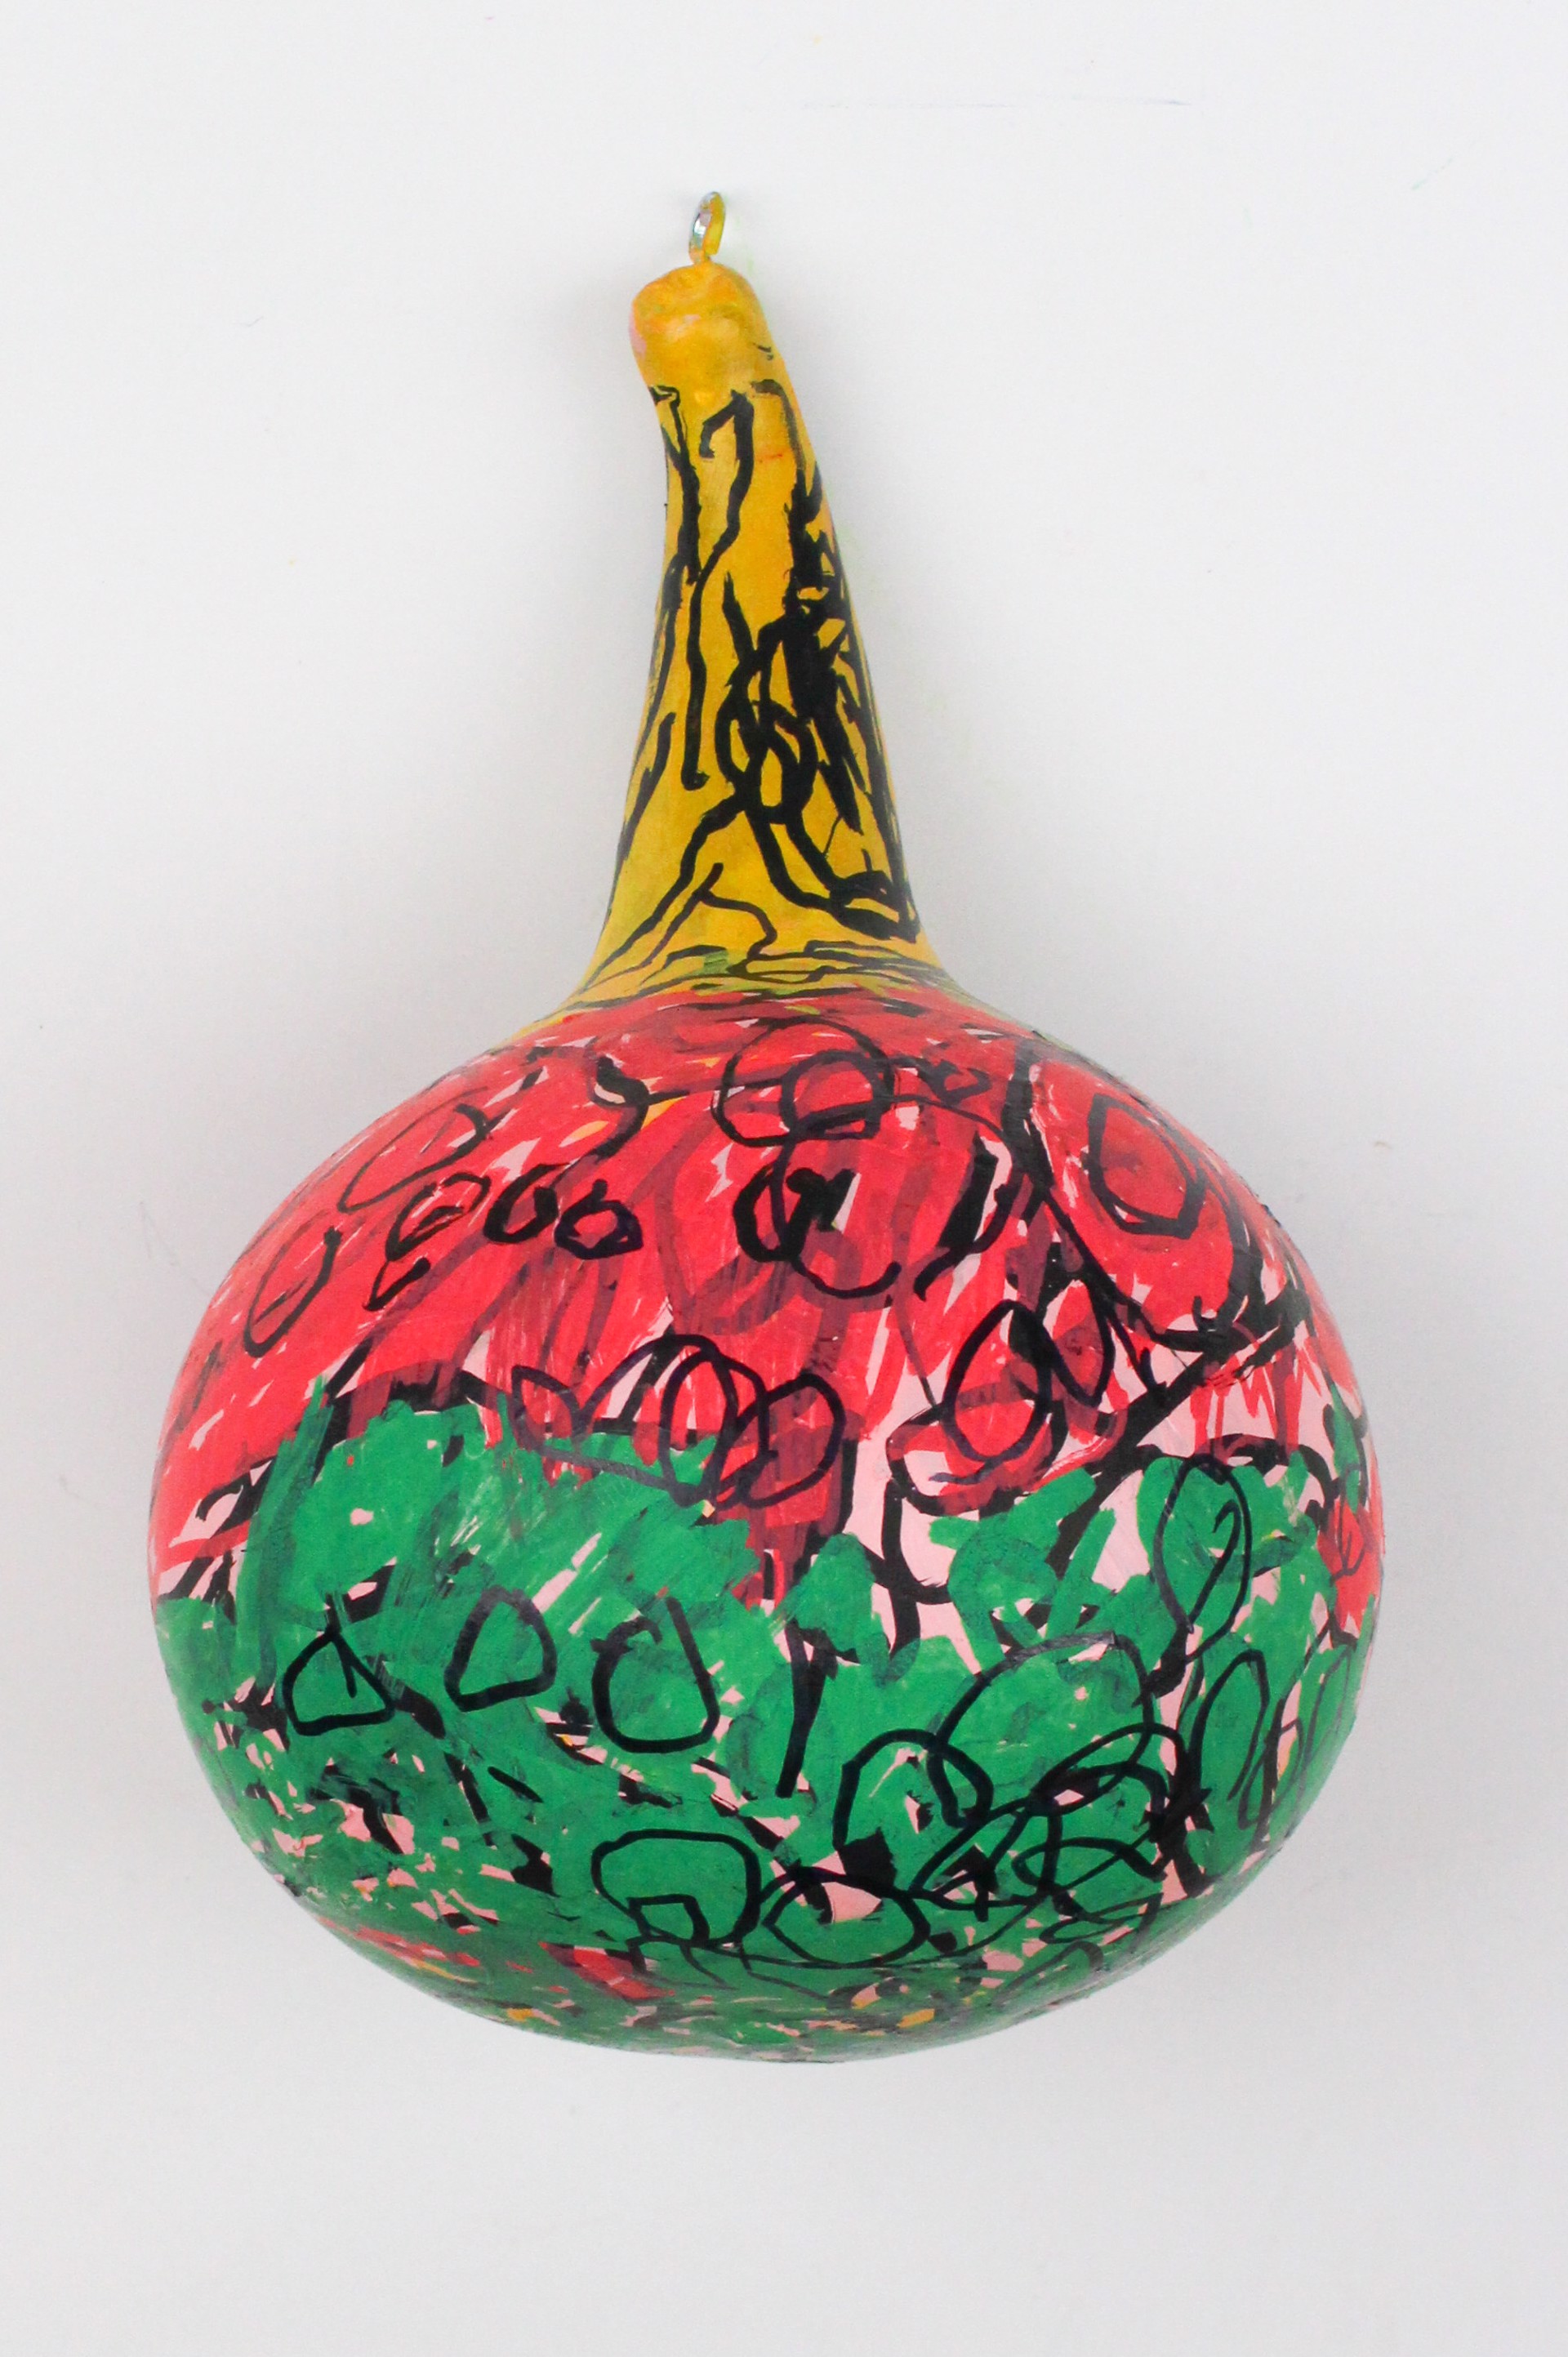 Colorful Gourd (ornament) by Gary Murrell